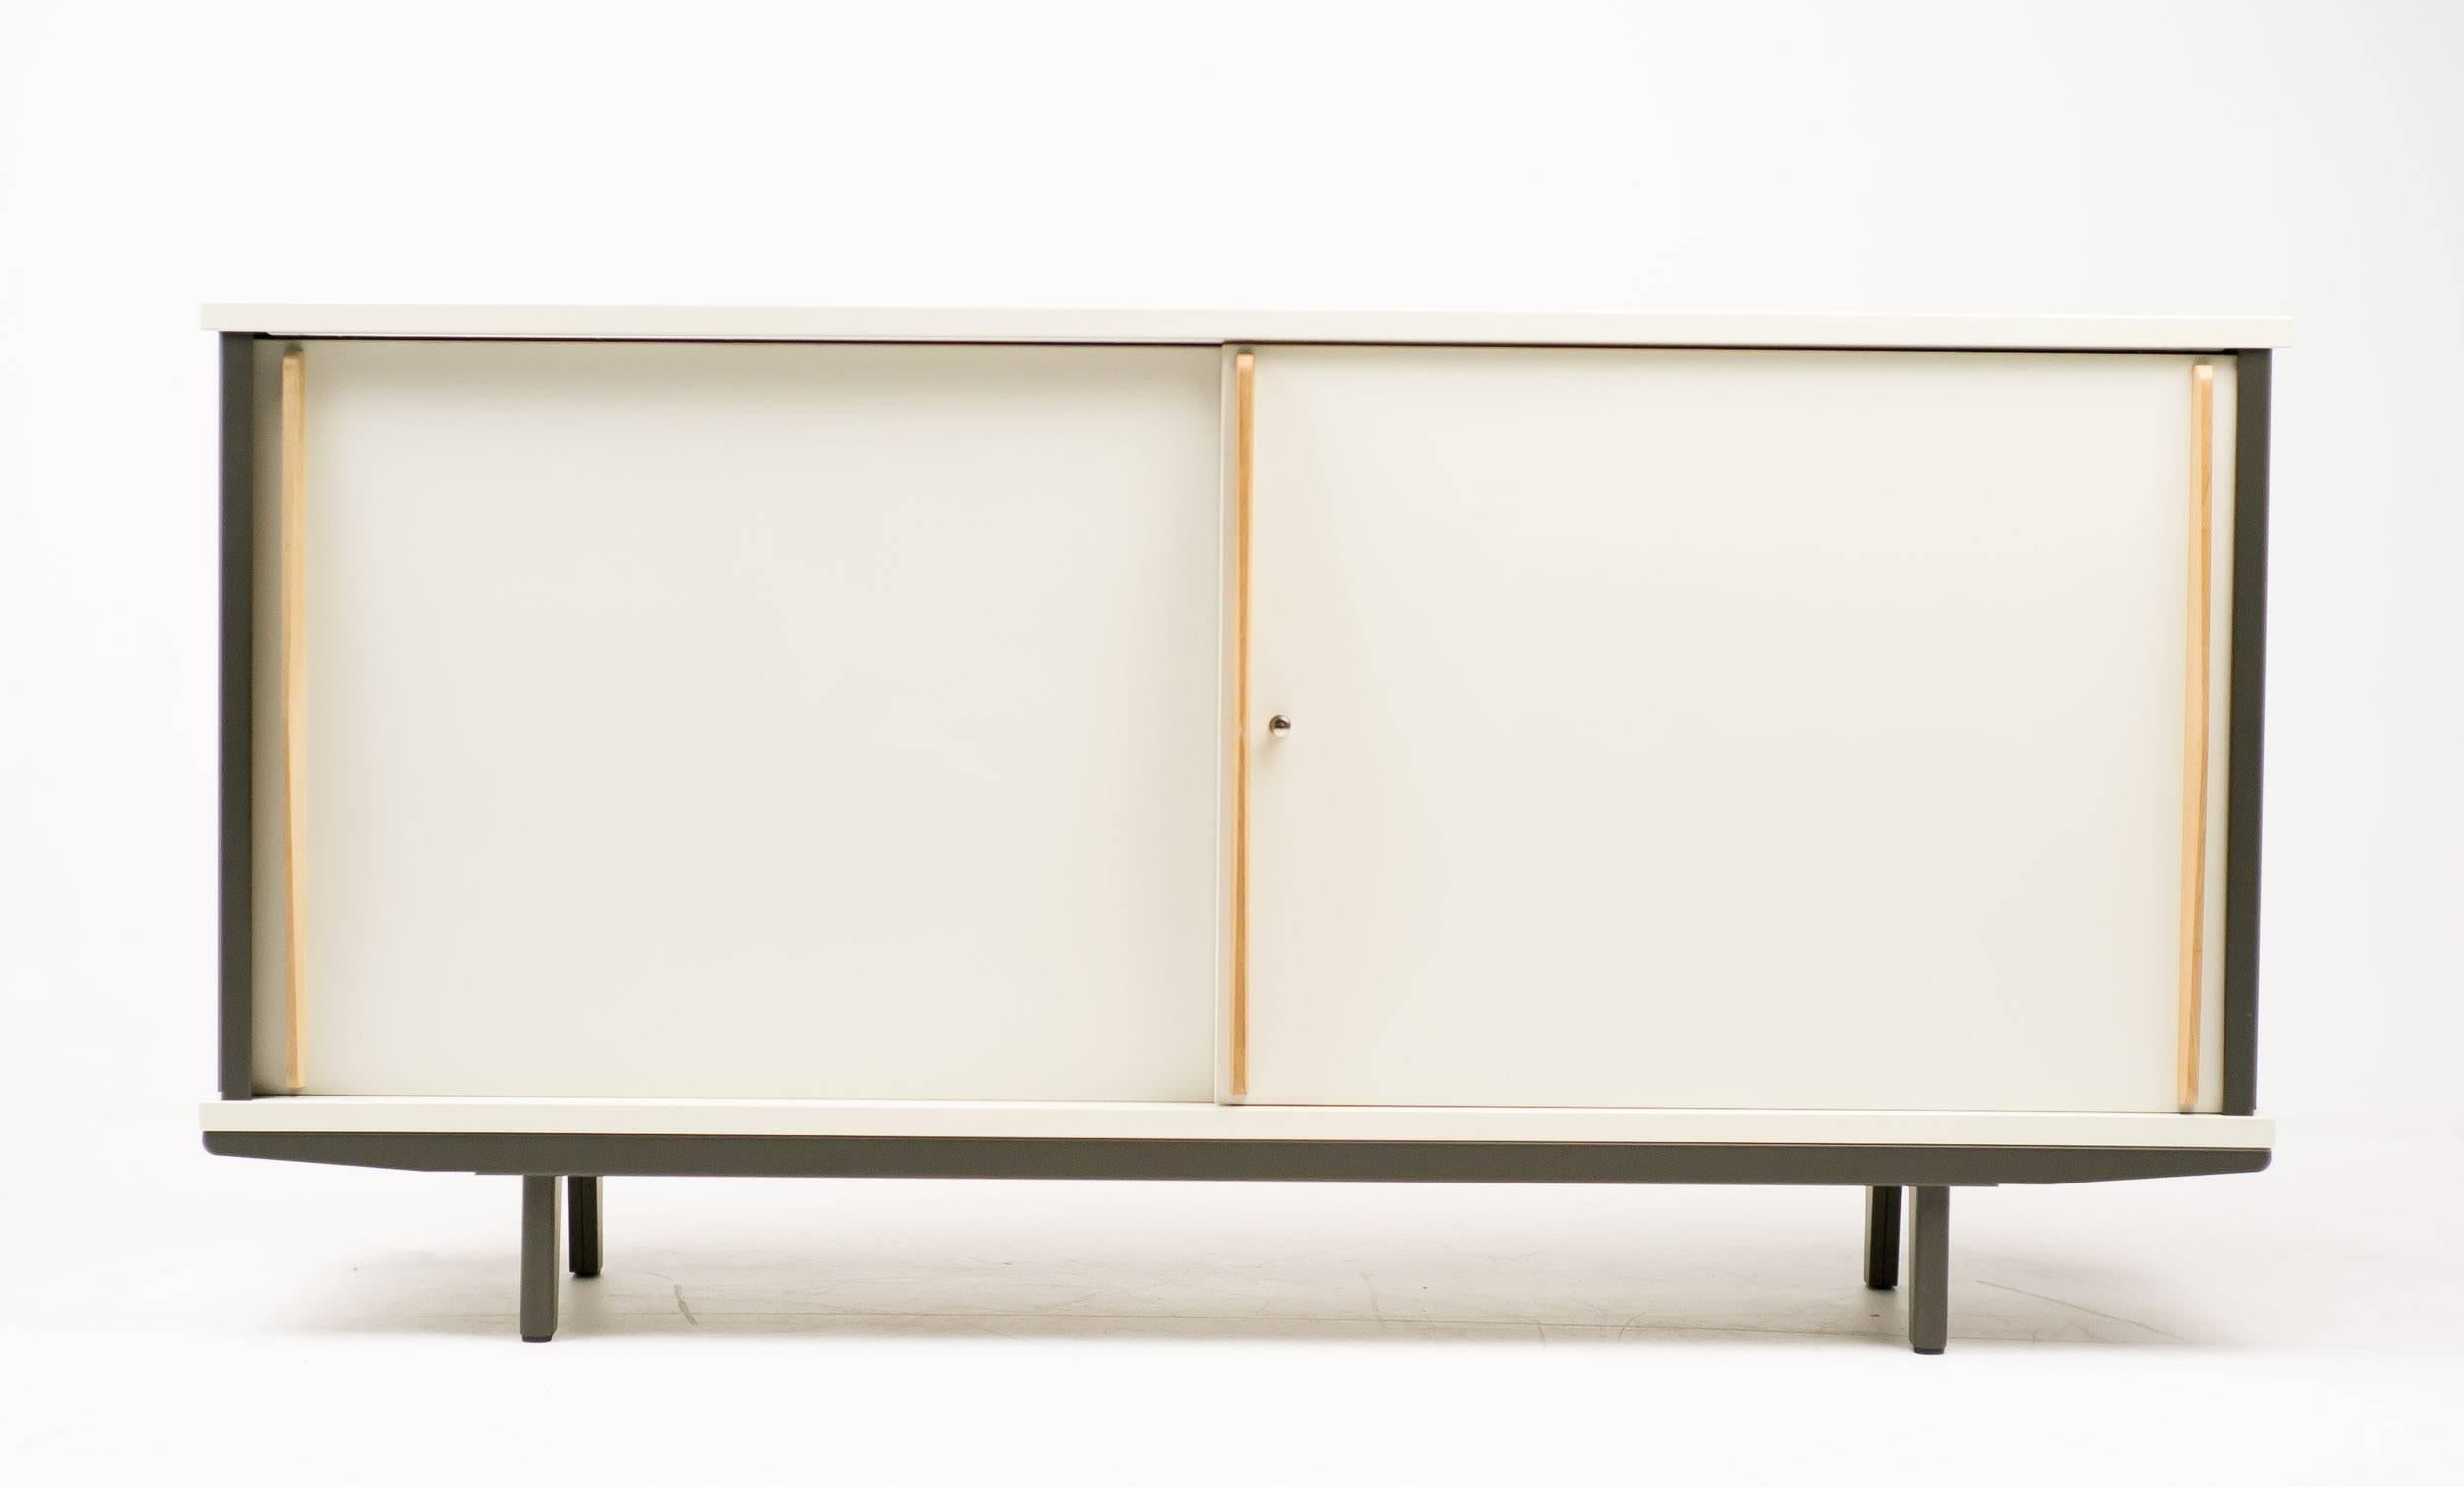 Limited edition Bahut sideboard from the G-Star Raw edition made by Vitra.
G-Star ordered these sideboards for their new Headquarters in Amsterdam by the architect Rem Koolhaas. They where also available for a limited time for other Prouvé